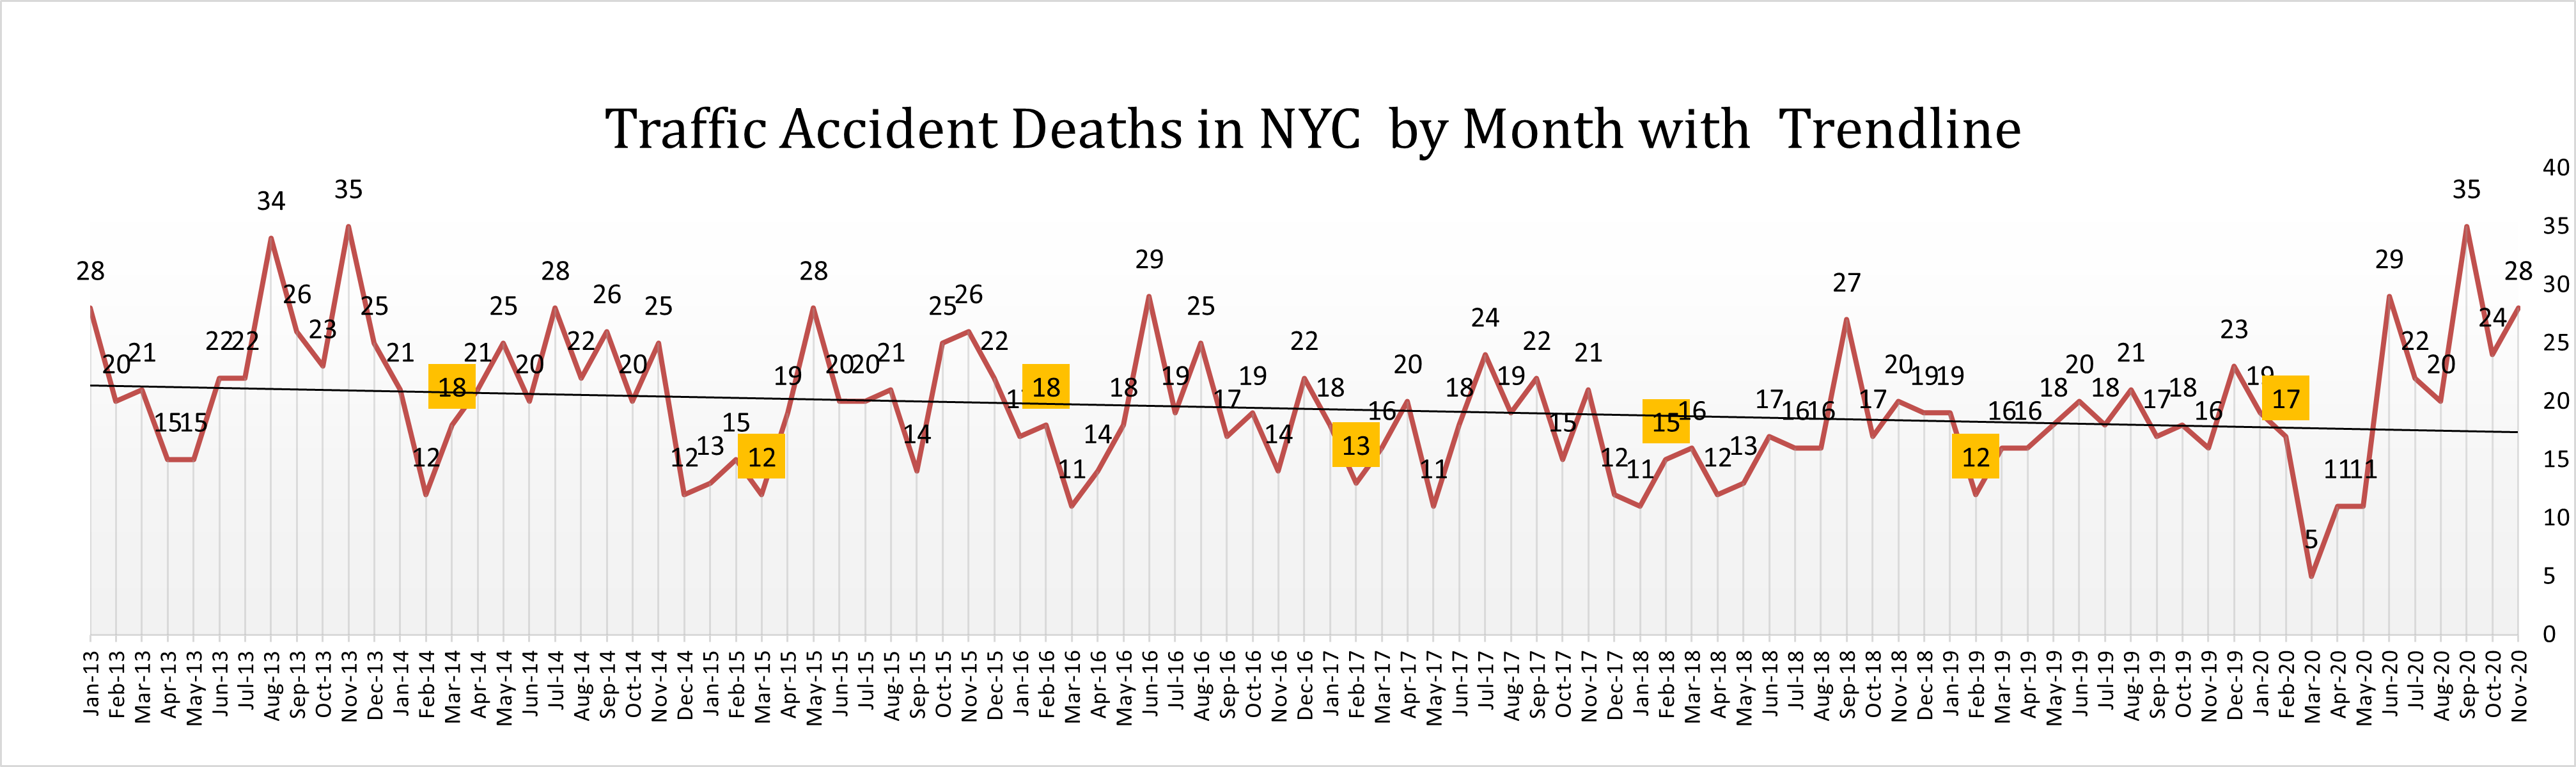 car accident death in NYC in November with trendline